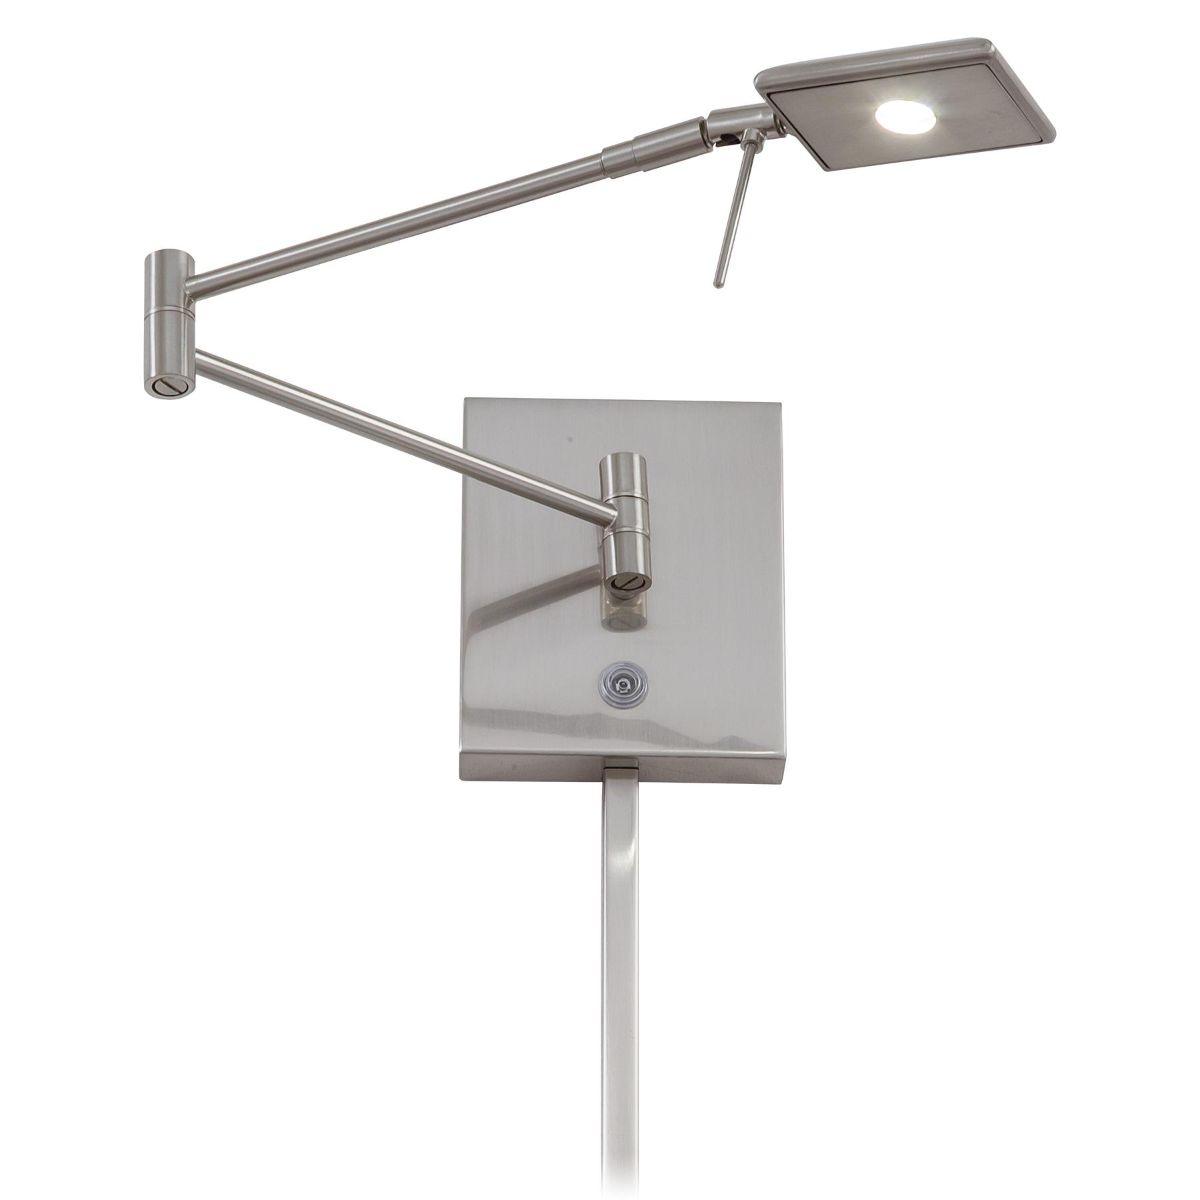 George's Reading Room Contemporary LED Swing Arm Wall Lamp